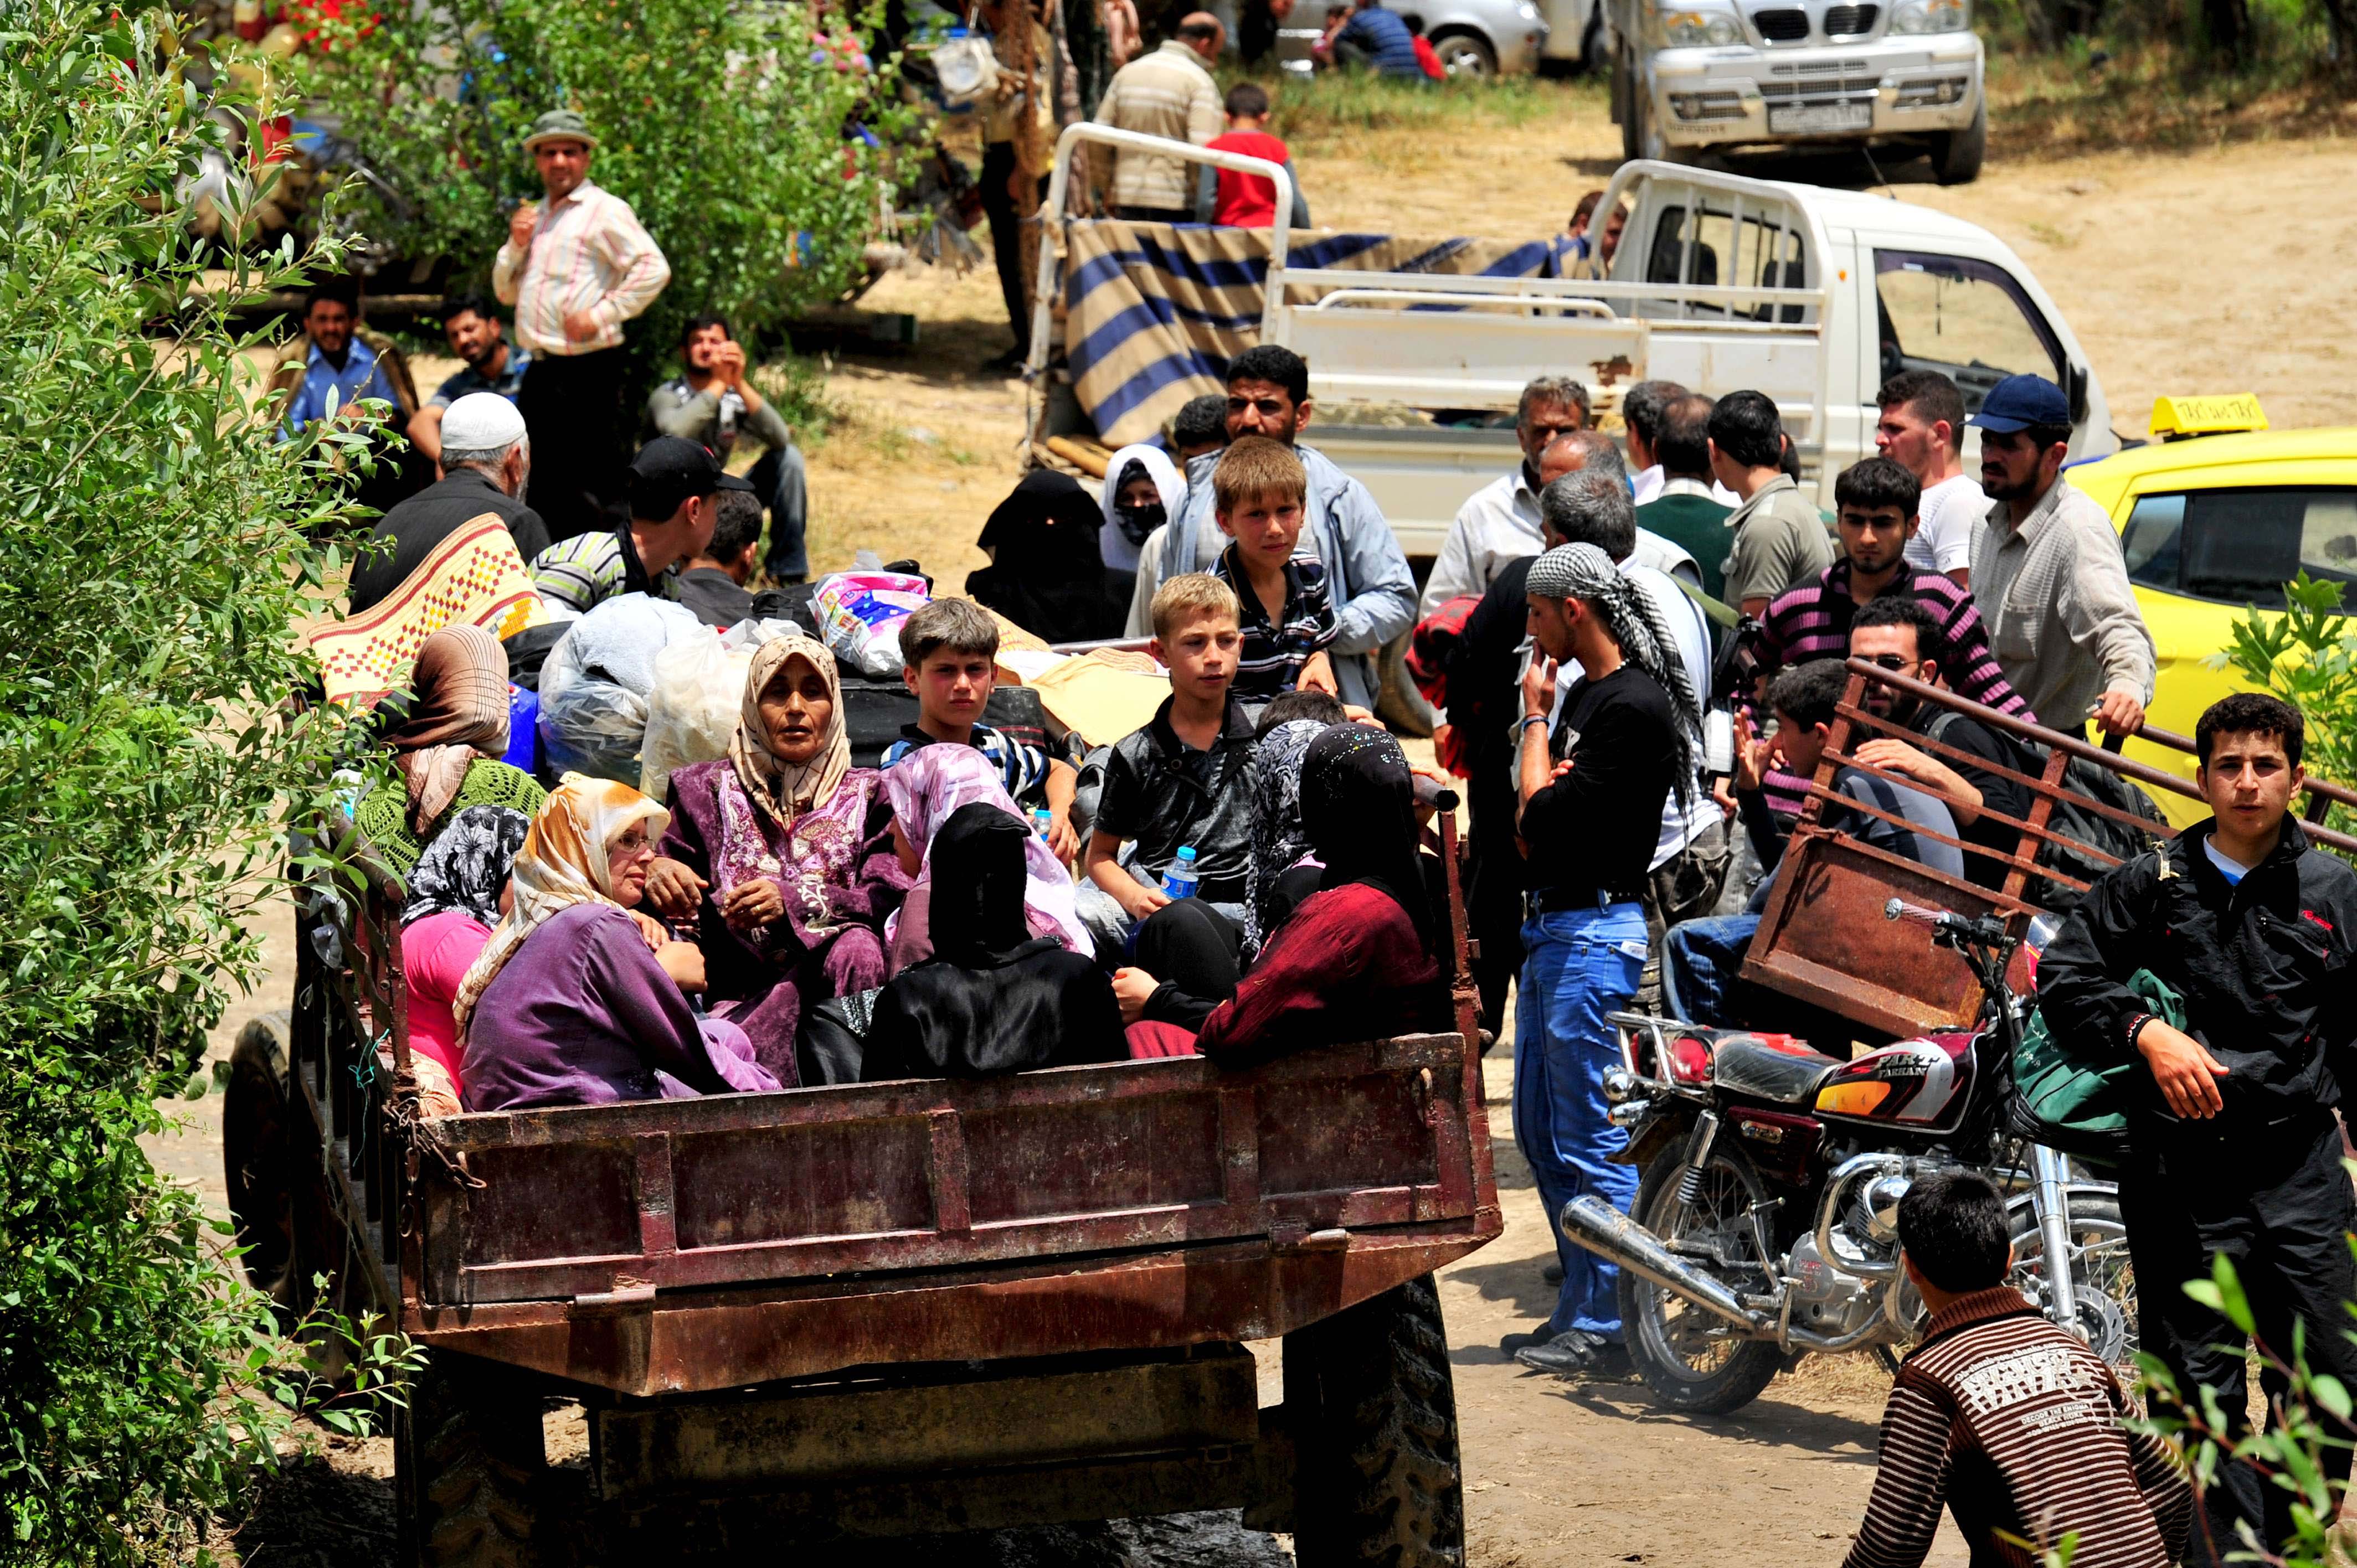 Syrian internally displaced persons arrive to a makeshift camp in the northern city of Idlib, near the Turkish village of Guvecci in Hatay, on June 13, 2011. More than 10,000 Syrians have fled into neighboring countries to escape a deadly government crackdown on opposition protests, the UN said today, with at least 5,000 people escaping to Turkey and at least 5,000 escaping to Lebanon. AFP PHOTO / MUSTAFA OZER